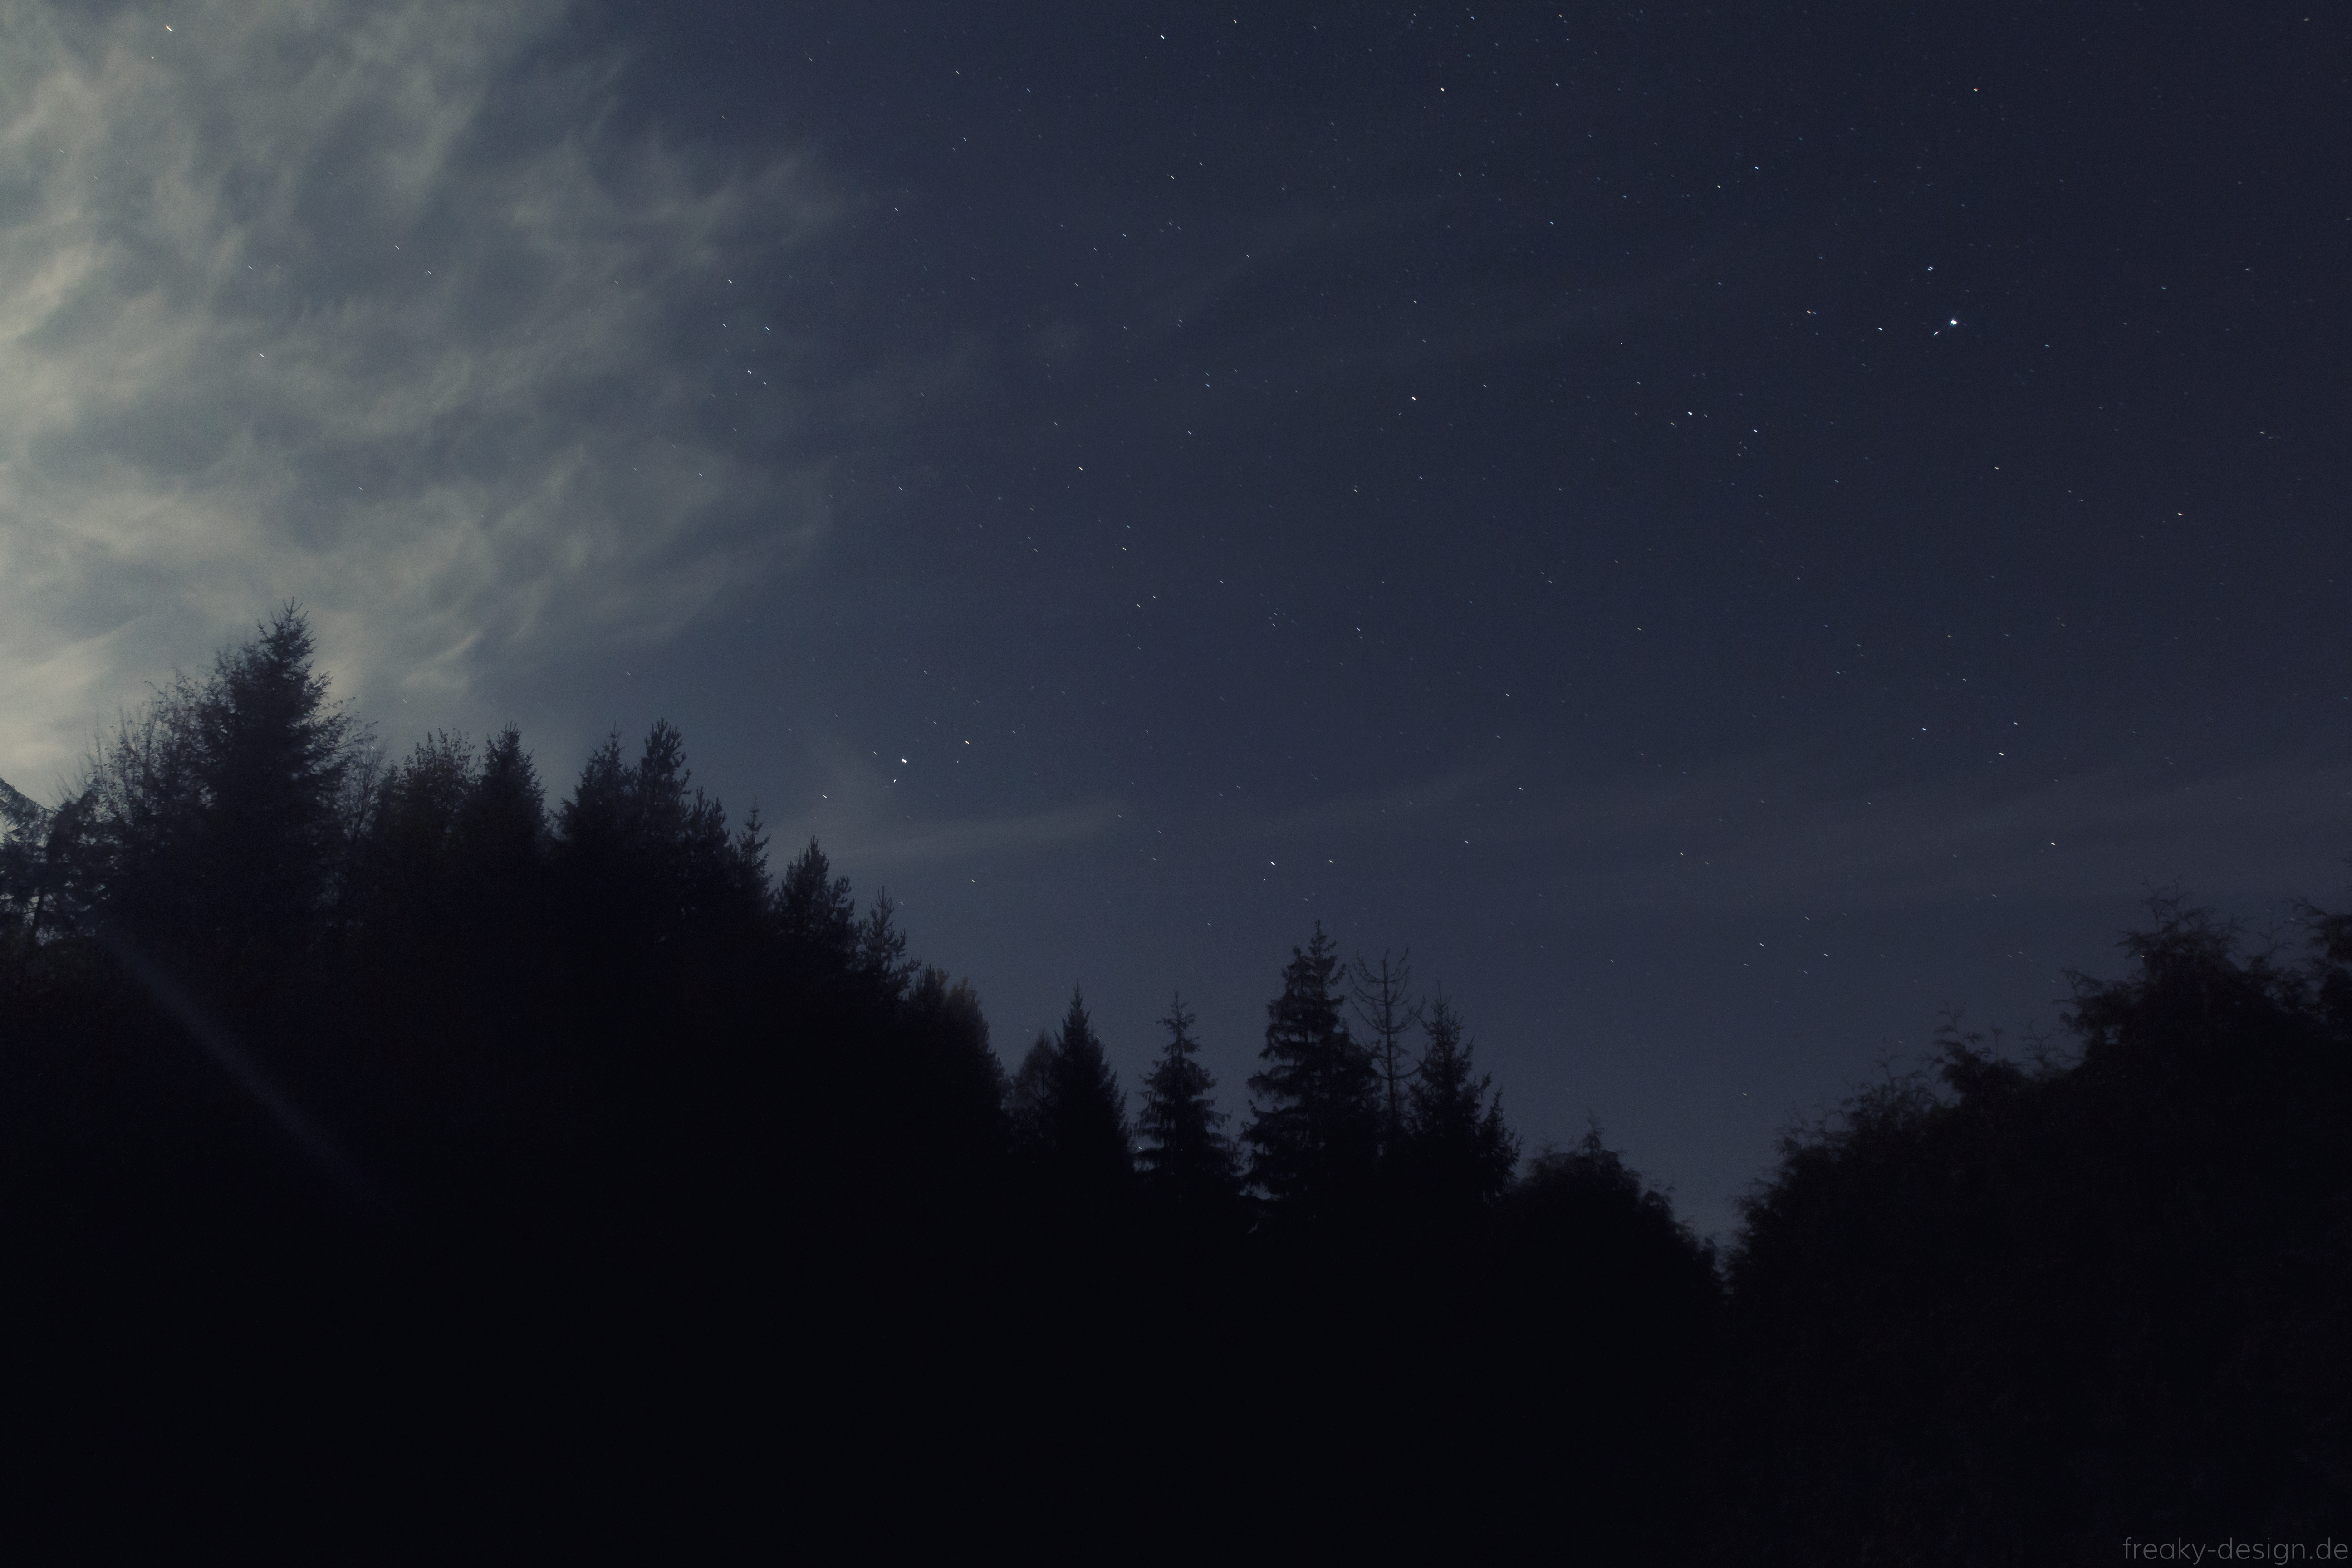 149259 download wallpaper dark, trees, night, starry sky, darkness screensavers and pictures for free